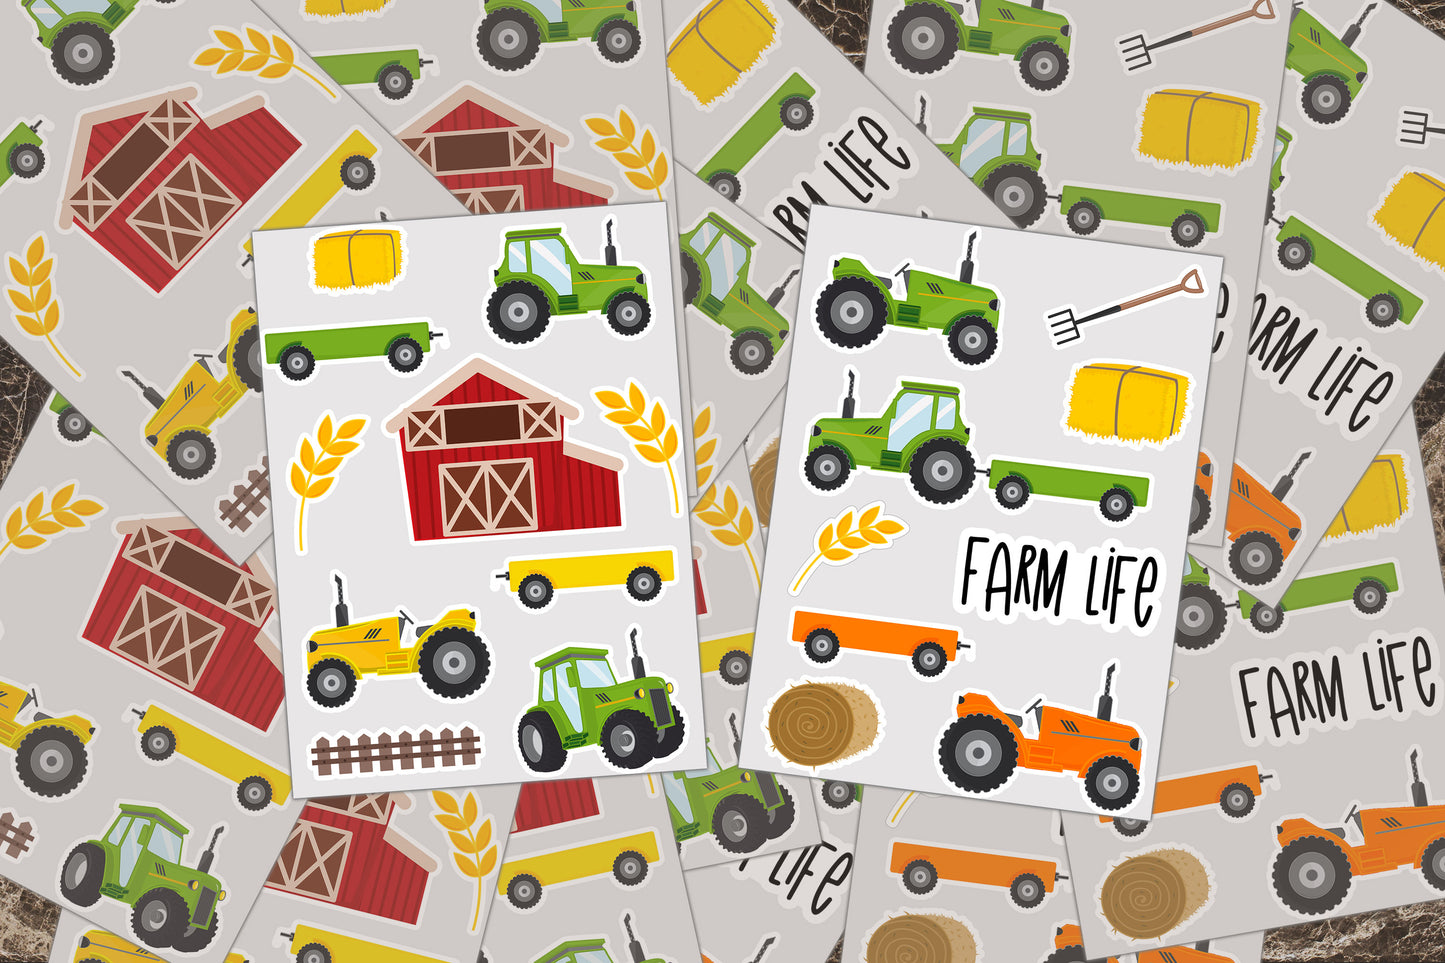 Sticker Sheets, Tractor Stickers, Vinyl Decal, Activity Book Decals, Barn Sticker, Birthday Party Favor, Tractor Trailers, Farm Stickers